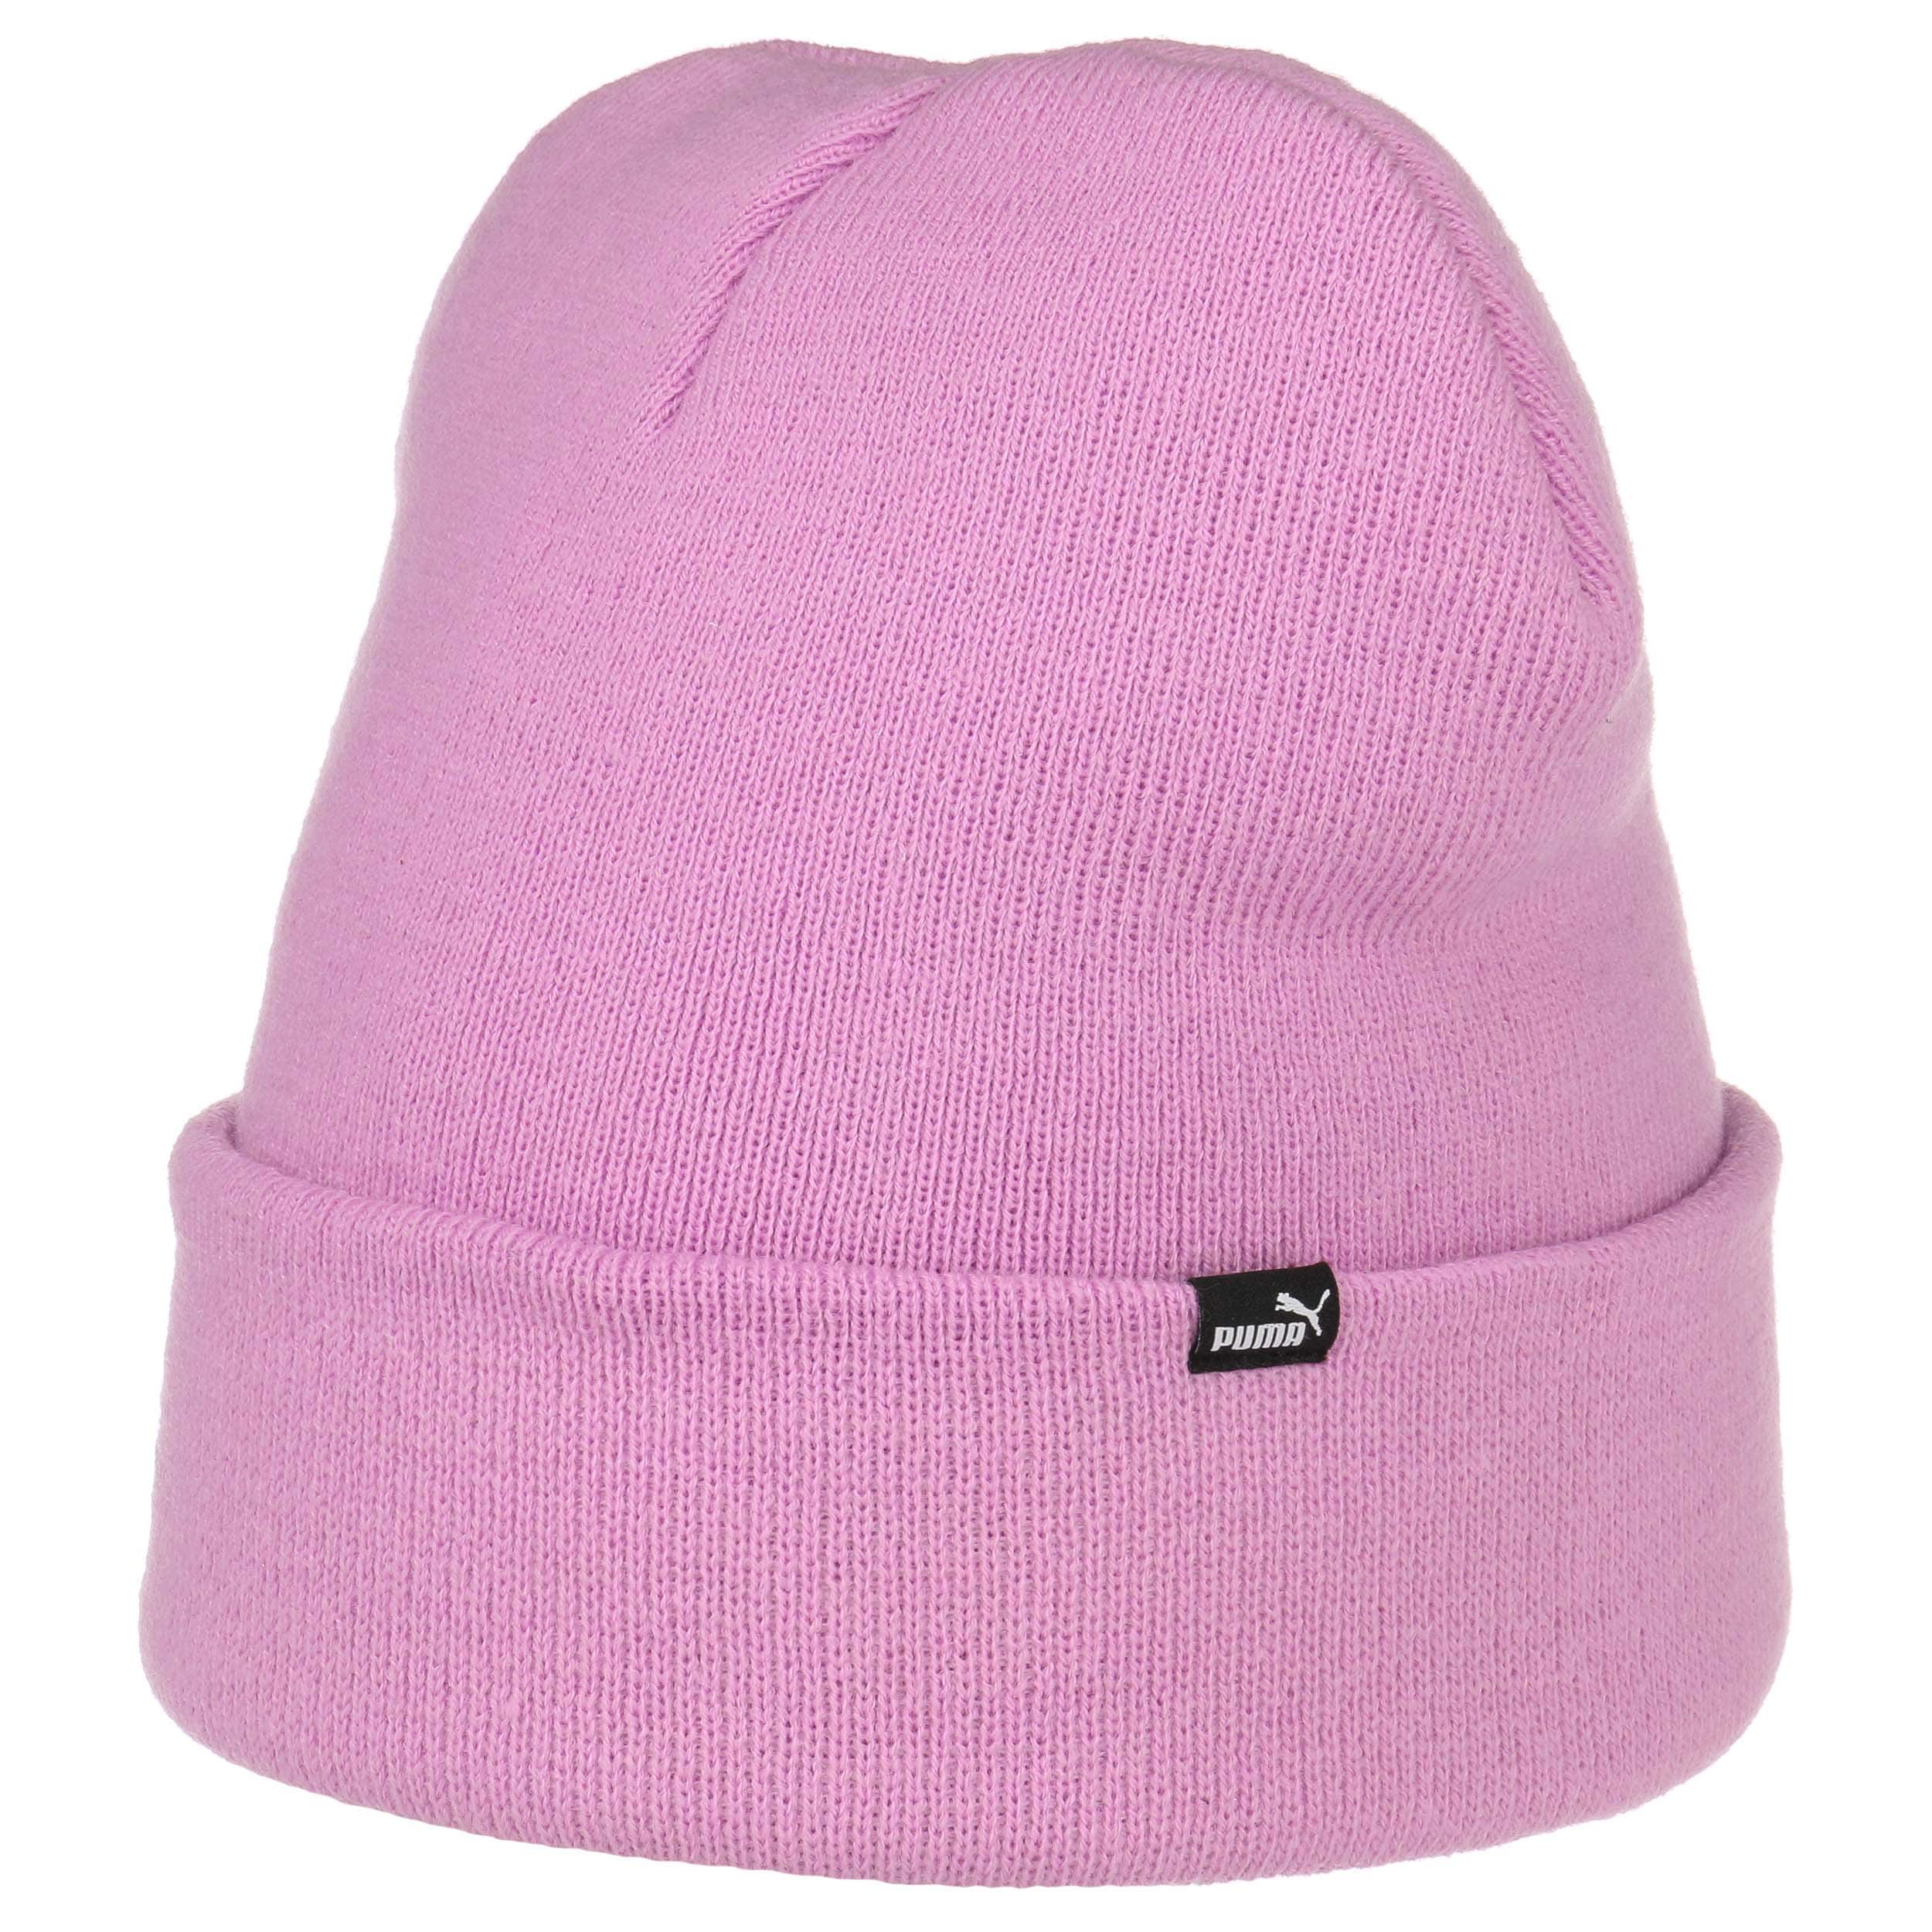 Classic Mid Fit Beanie Hat by PUMA